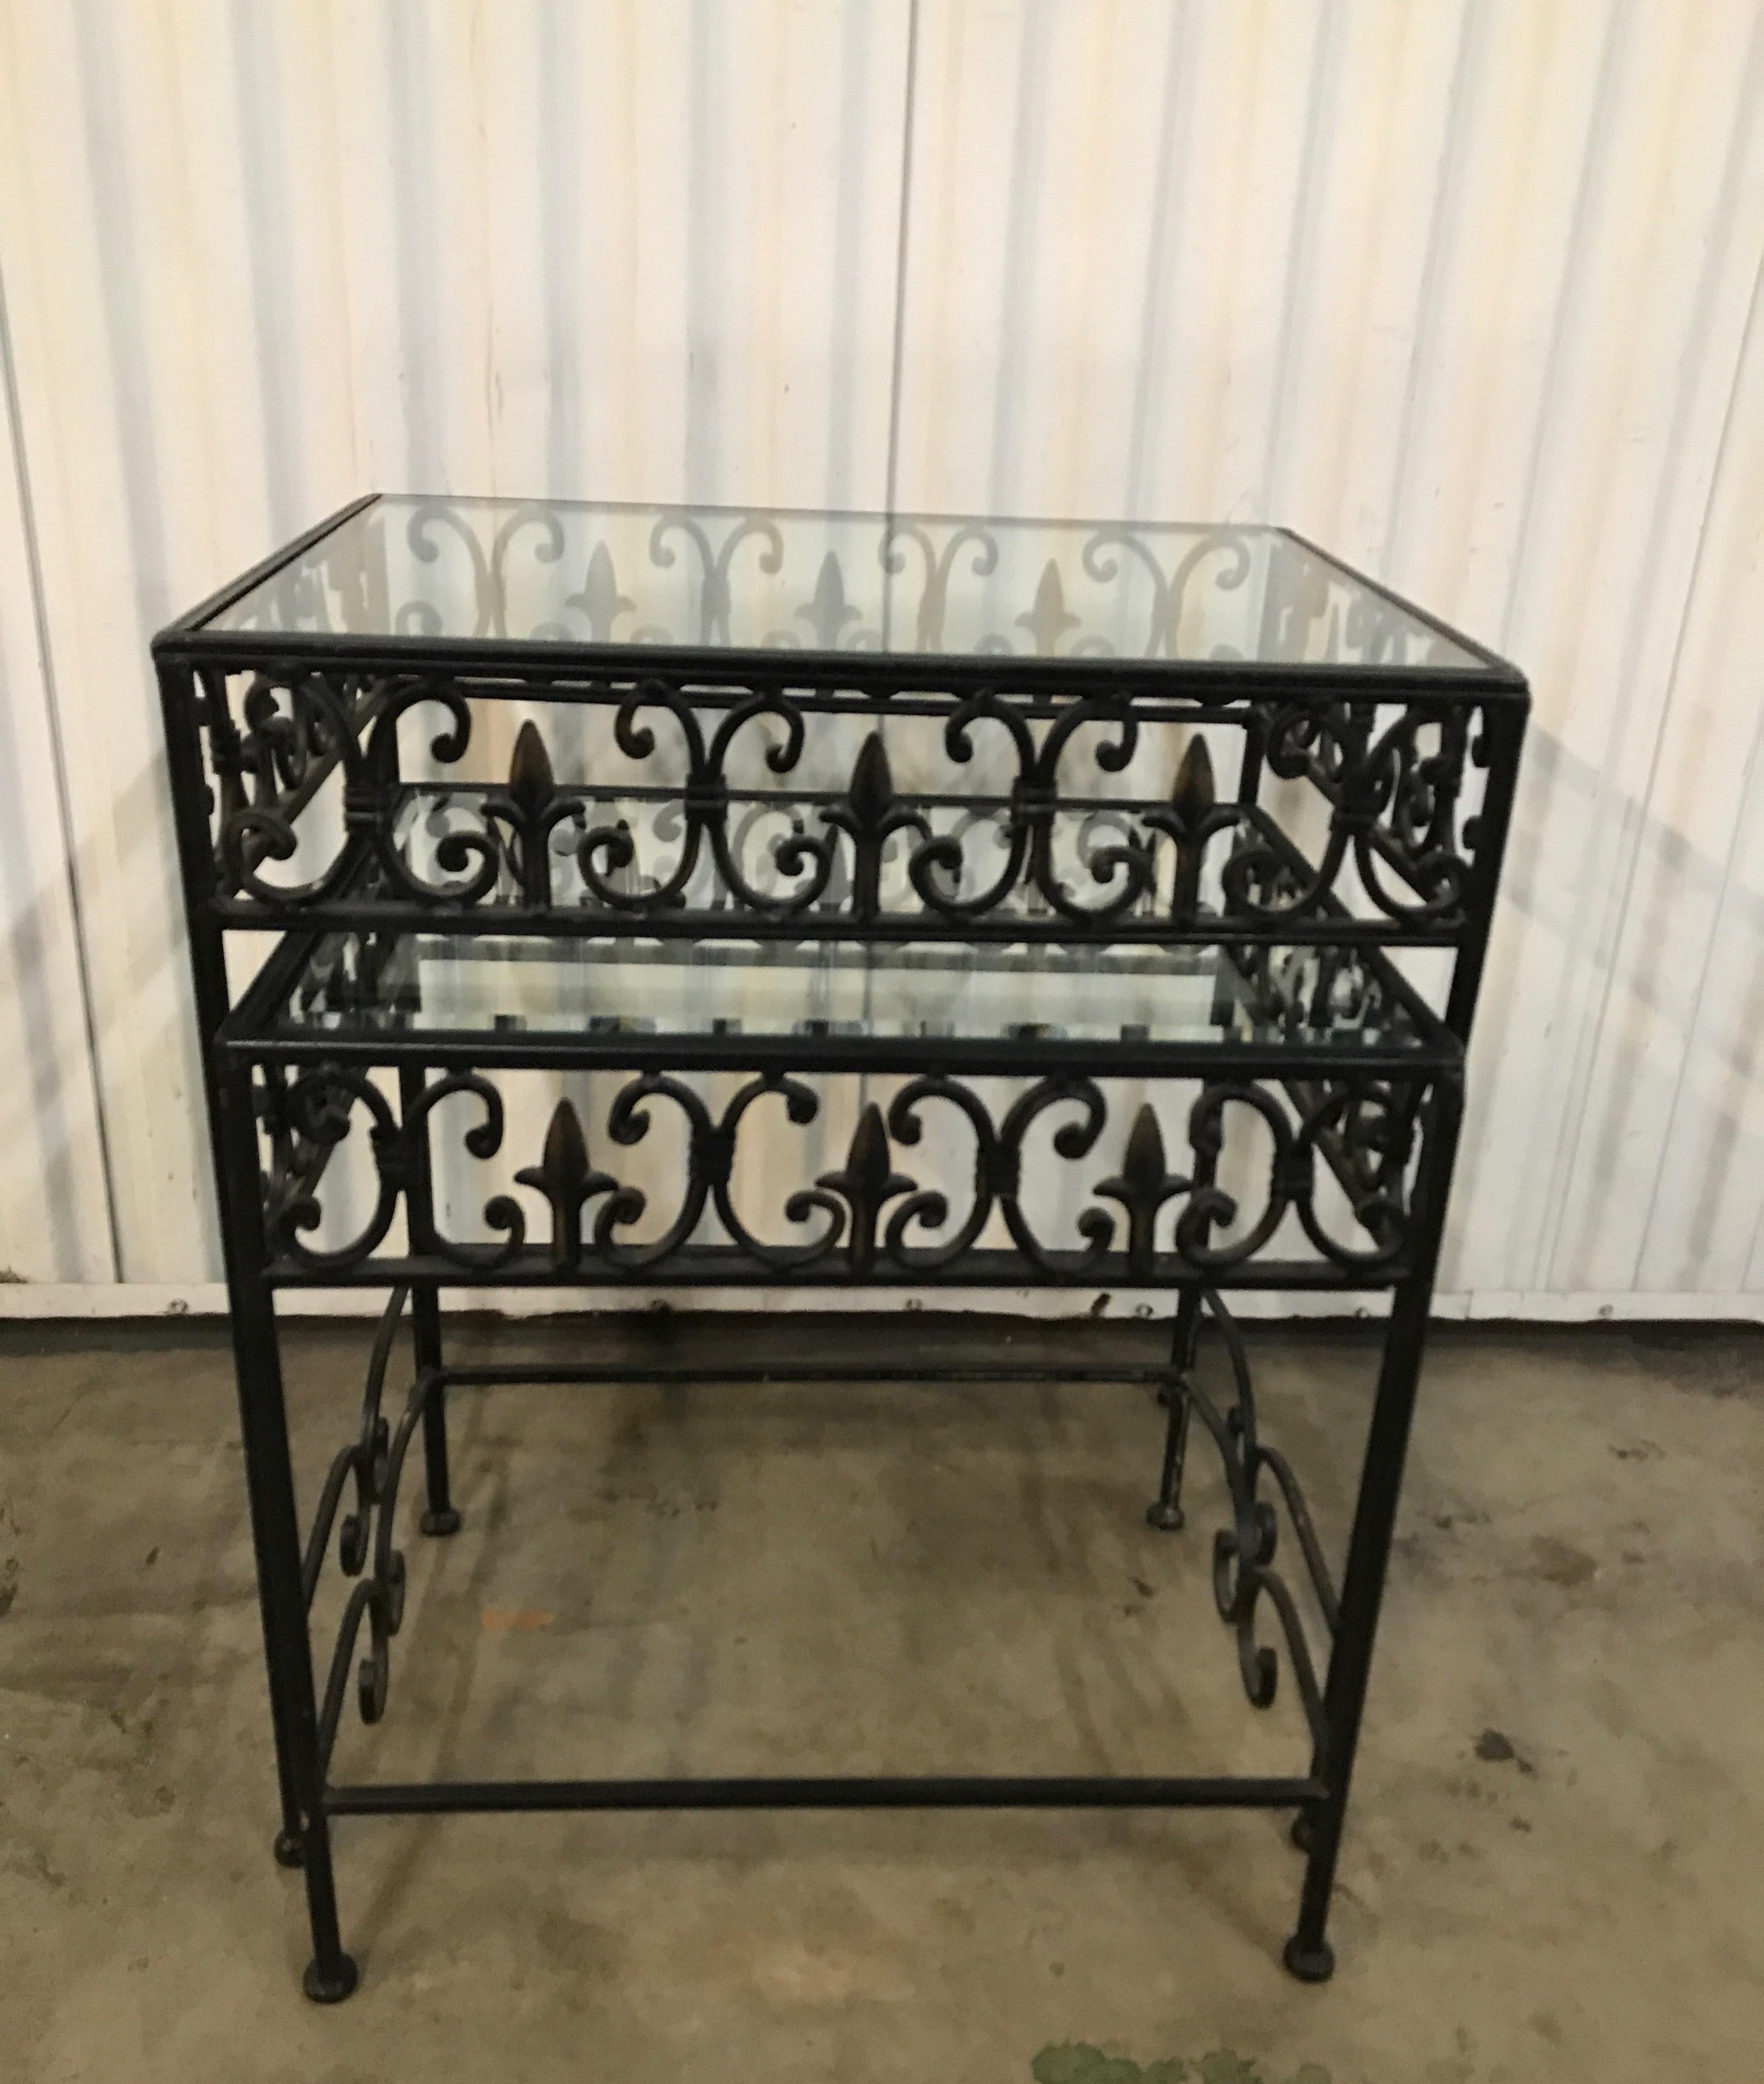 Fleur de lys black iron stacking tables with glass tops.